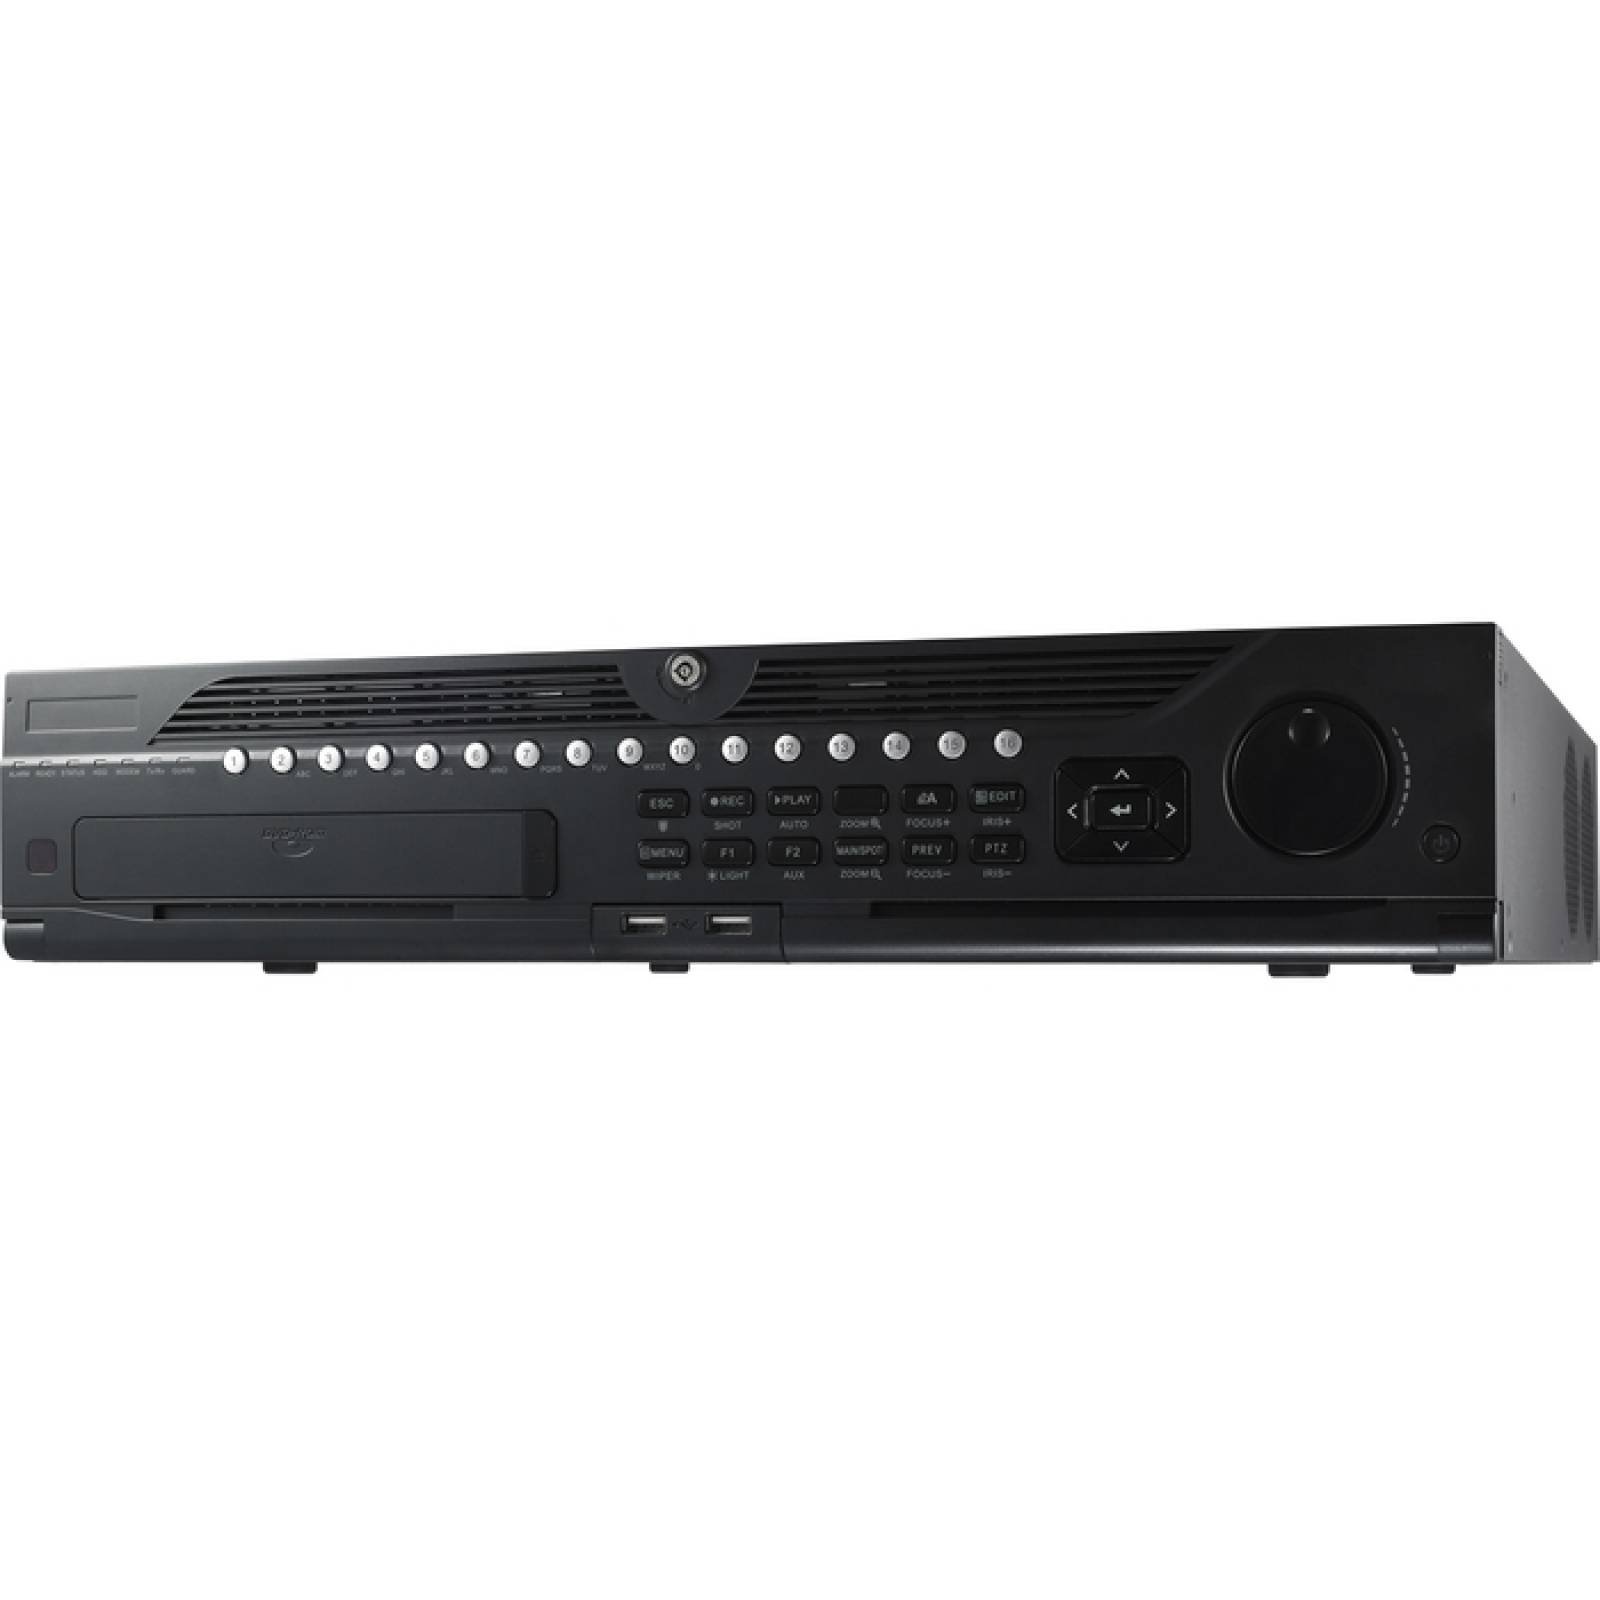 Hikvision DS9616NII8 Network Video Recorder